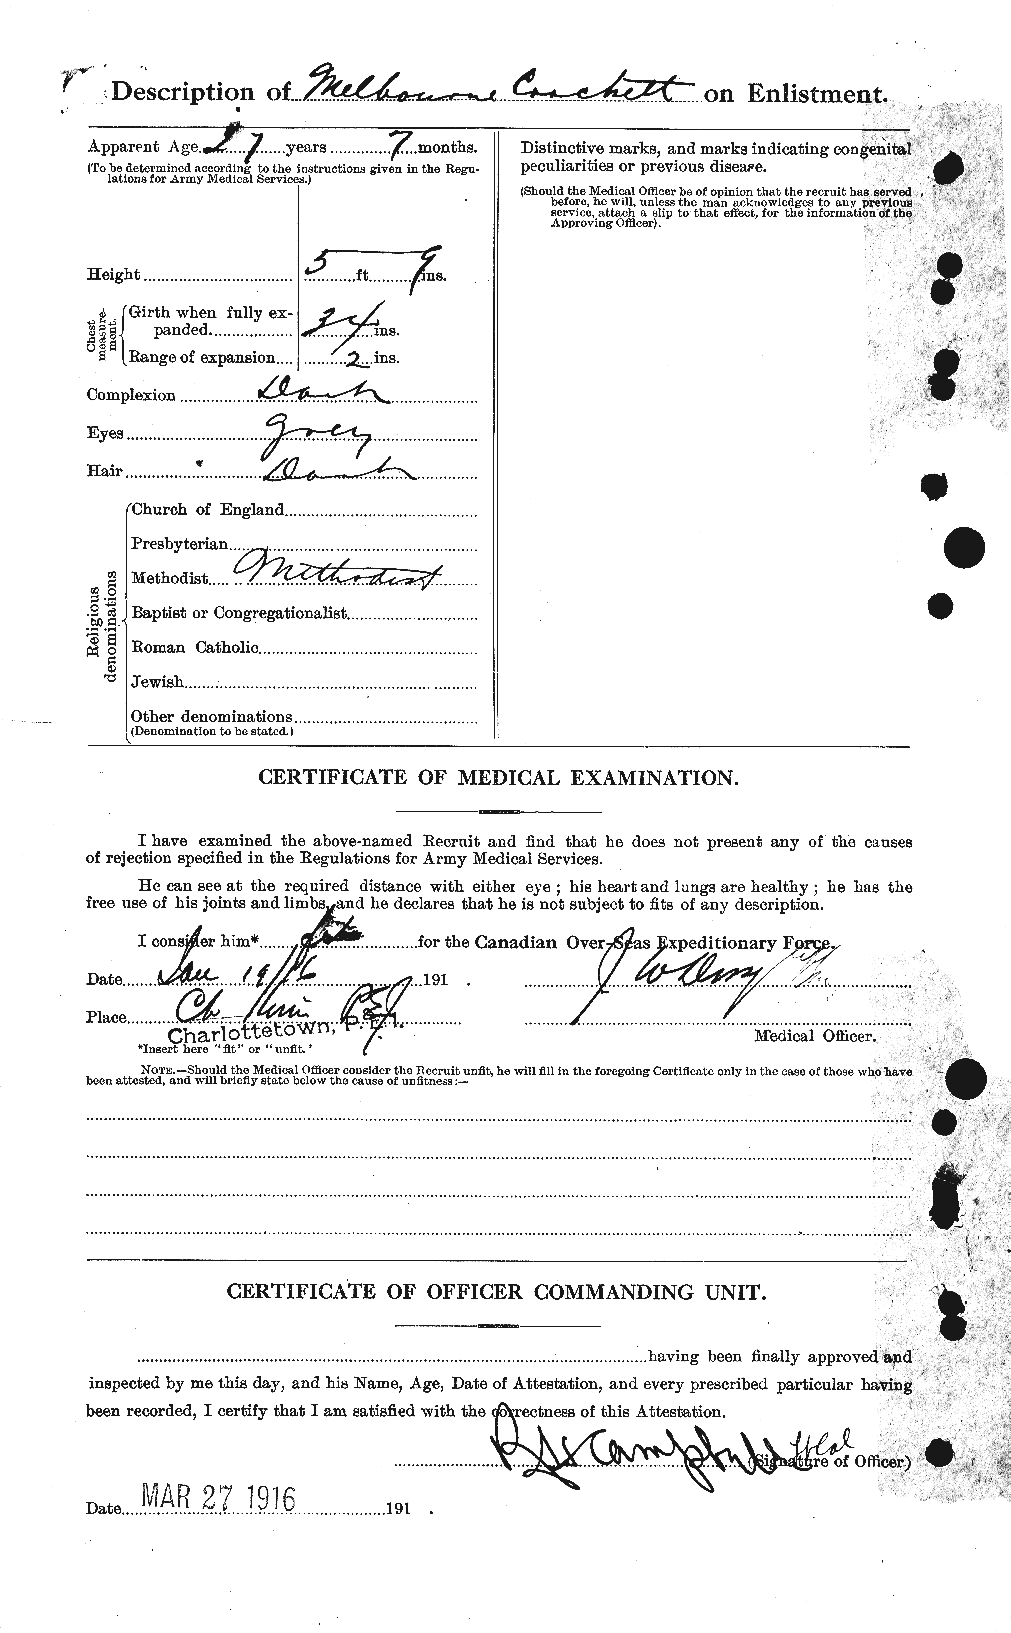 Personnel Records of the First World War - CEF 064529b